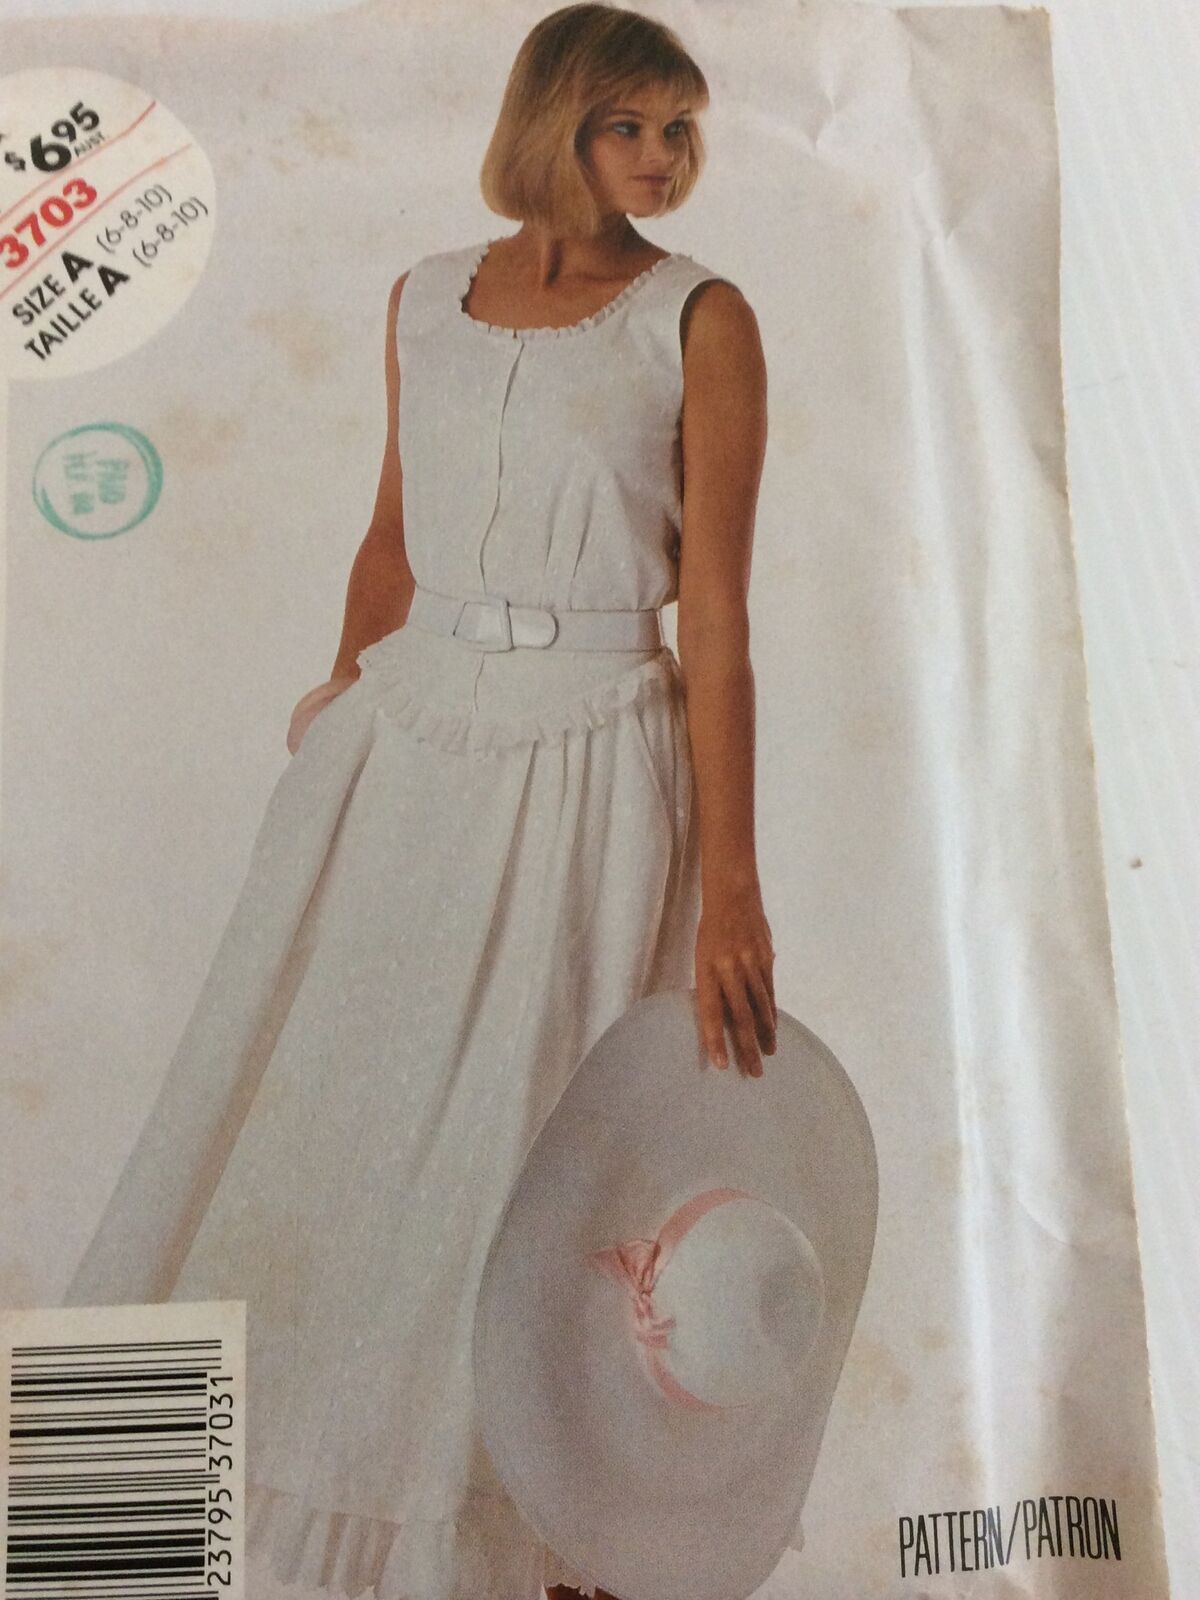 1989 McCalls 3703 Vintage Sewing Pattern Womens  Blouse Skirt Size 6 8 10